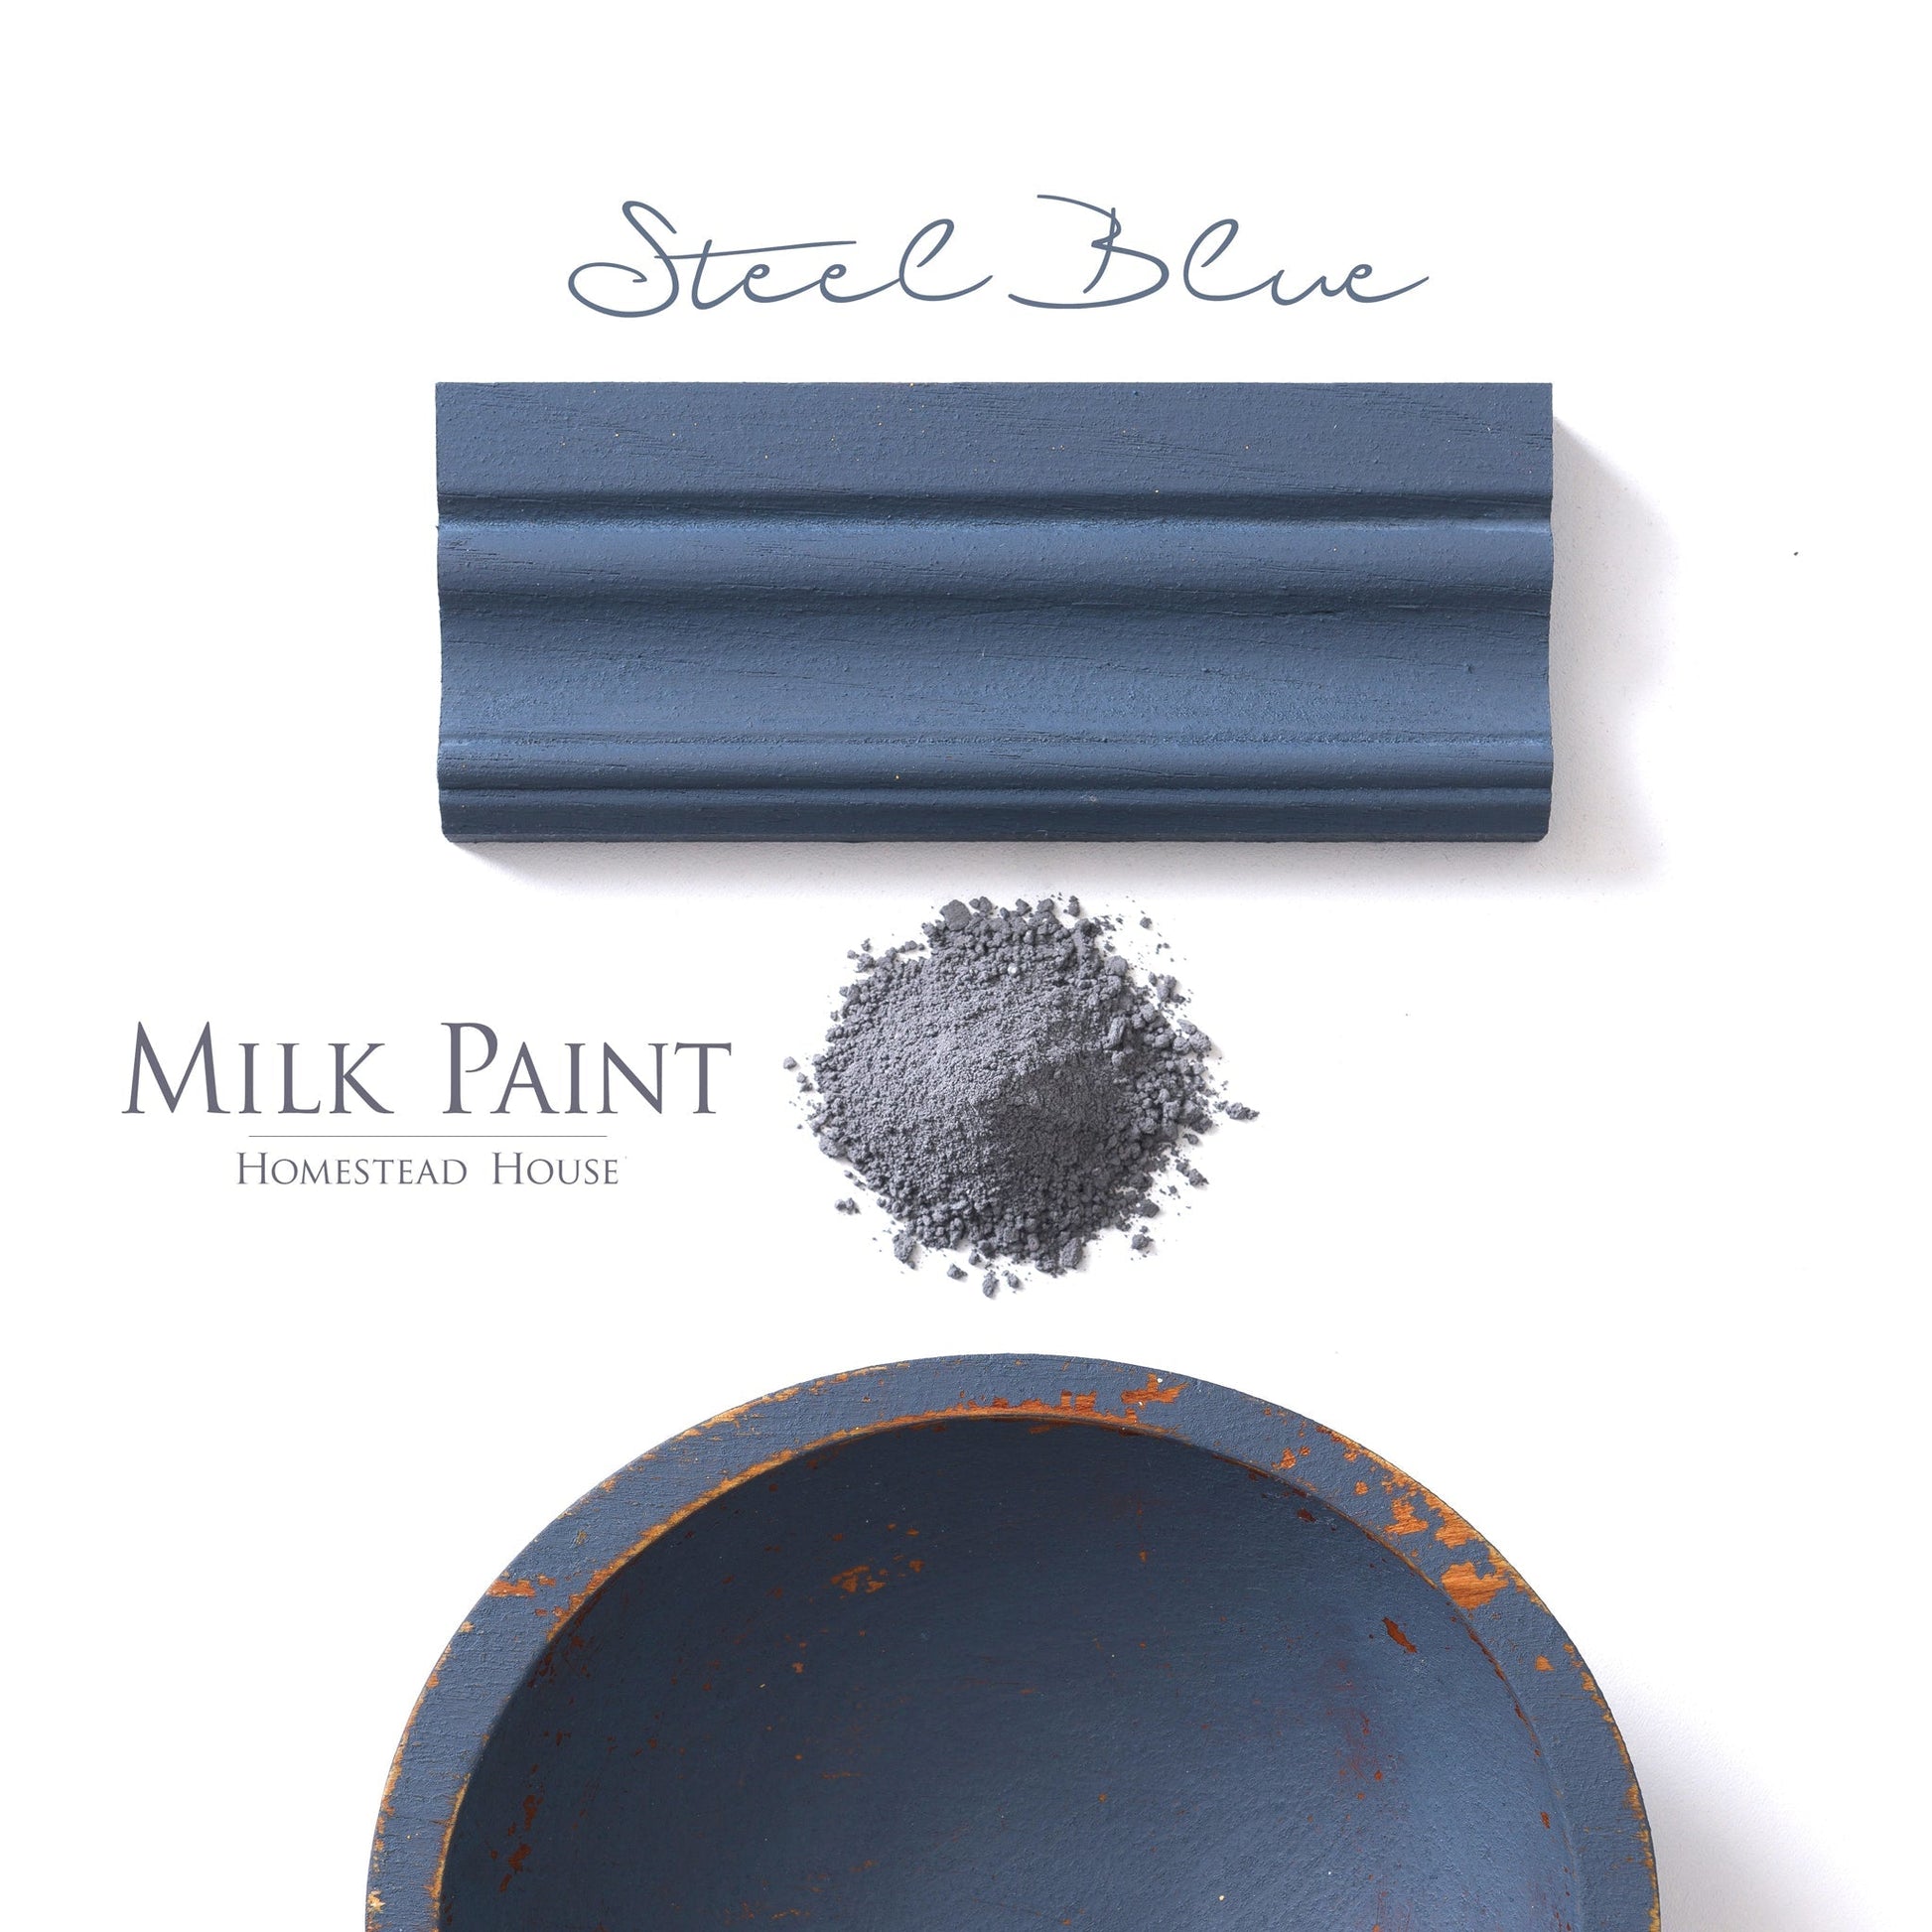 Milk Paint from Homestead House in Steel Blue -Deep rich muted blue with a grey undertone. | homesteadhouse.ca